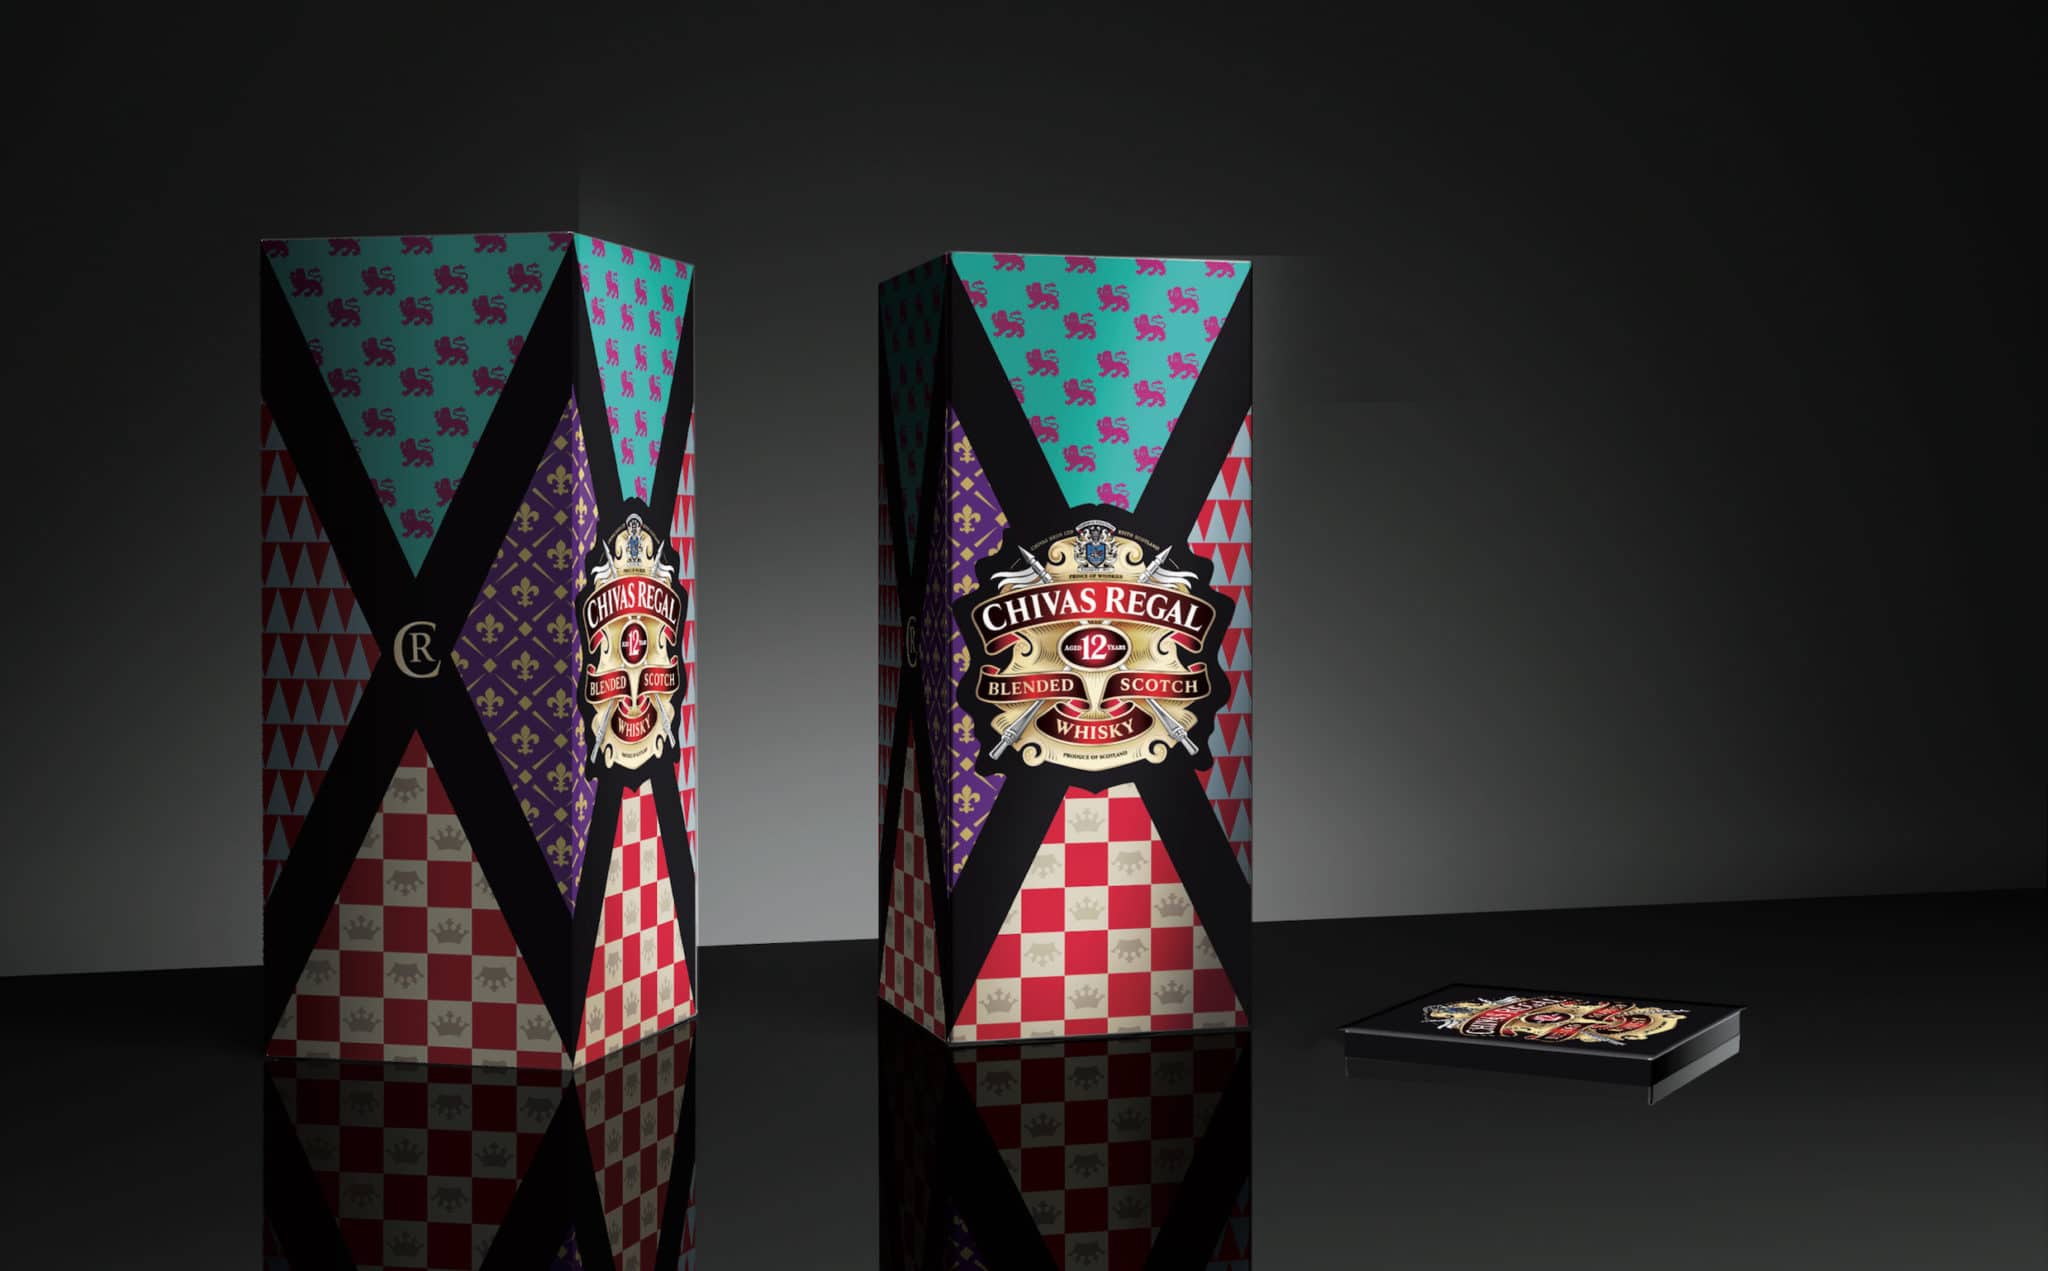 3D rendering of a gift box packaging and graphic design